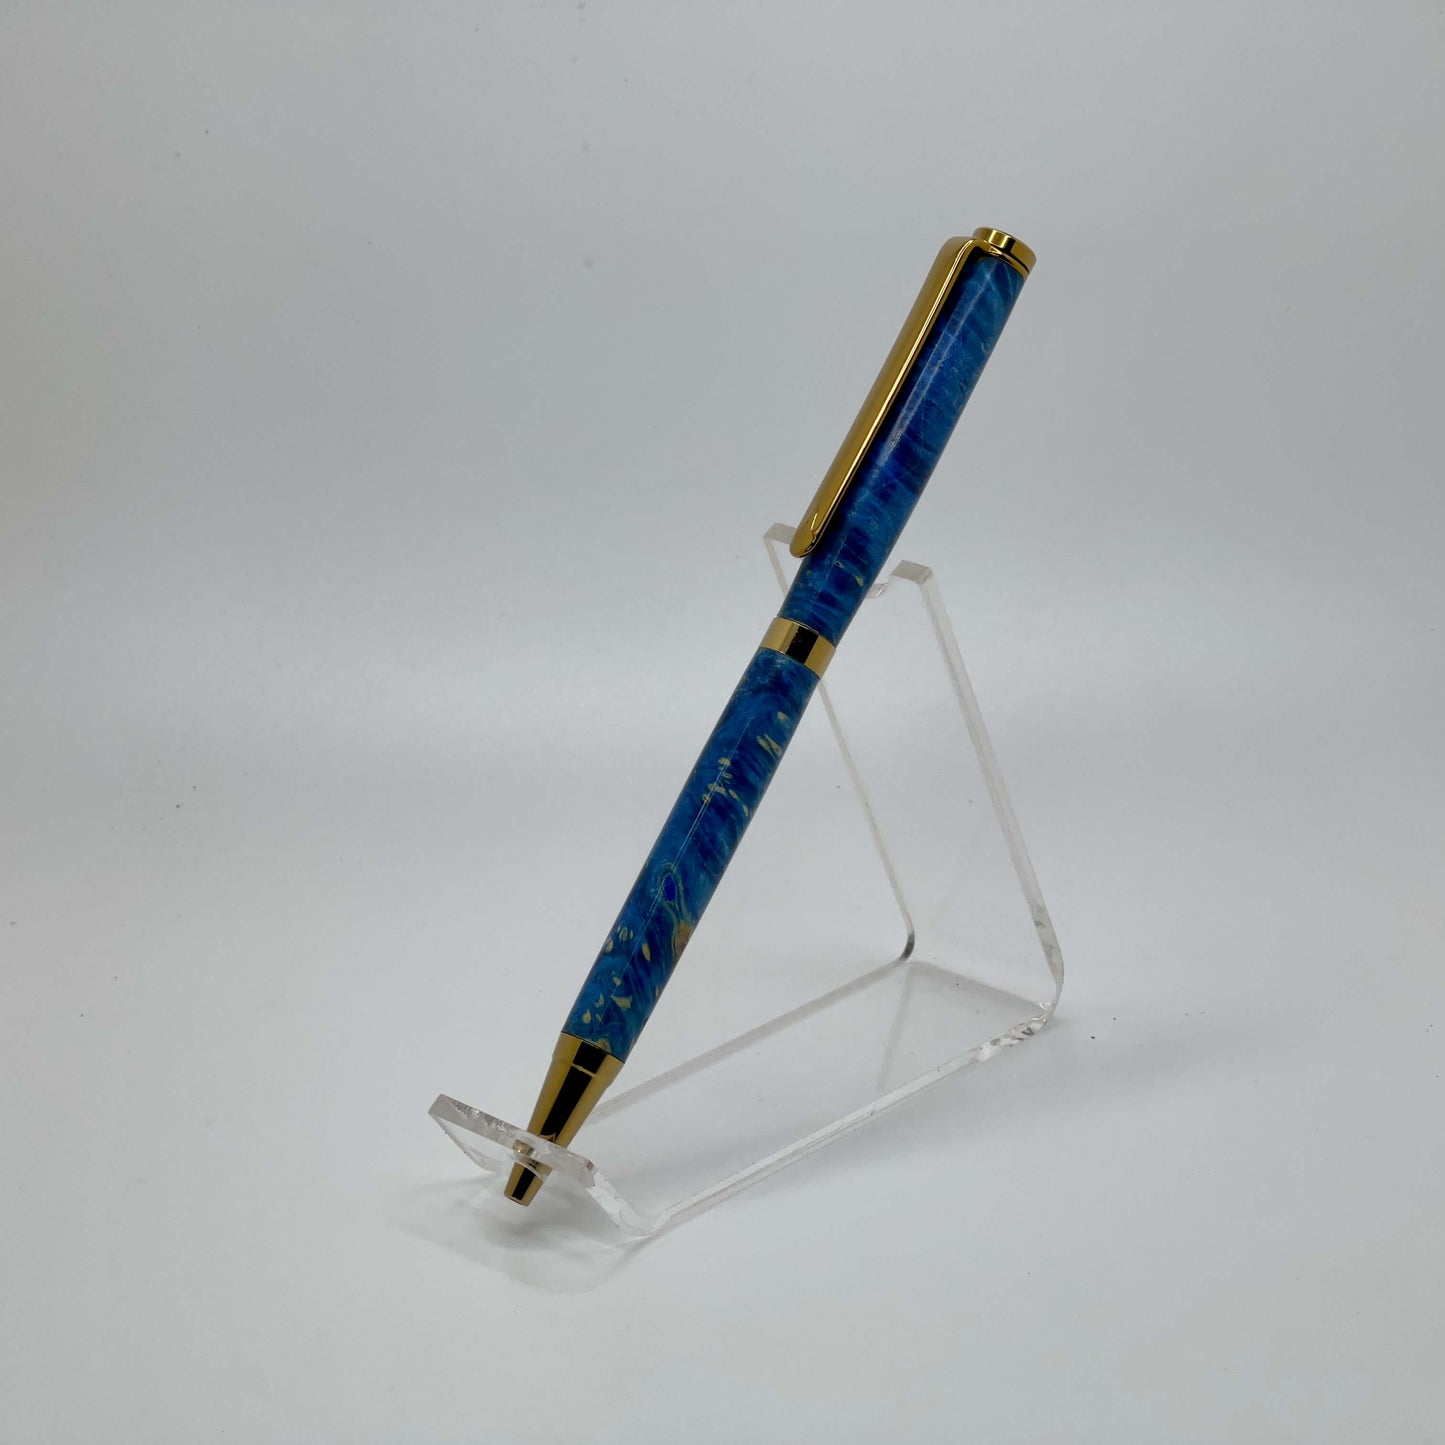 Right side view of handcrafted pen with Box Elder Burl wood dyed blue